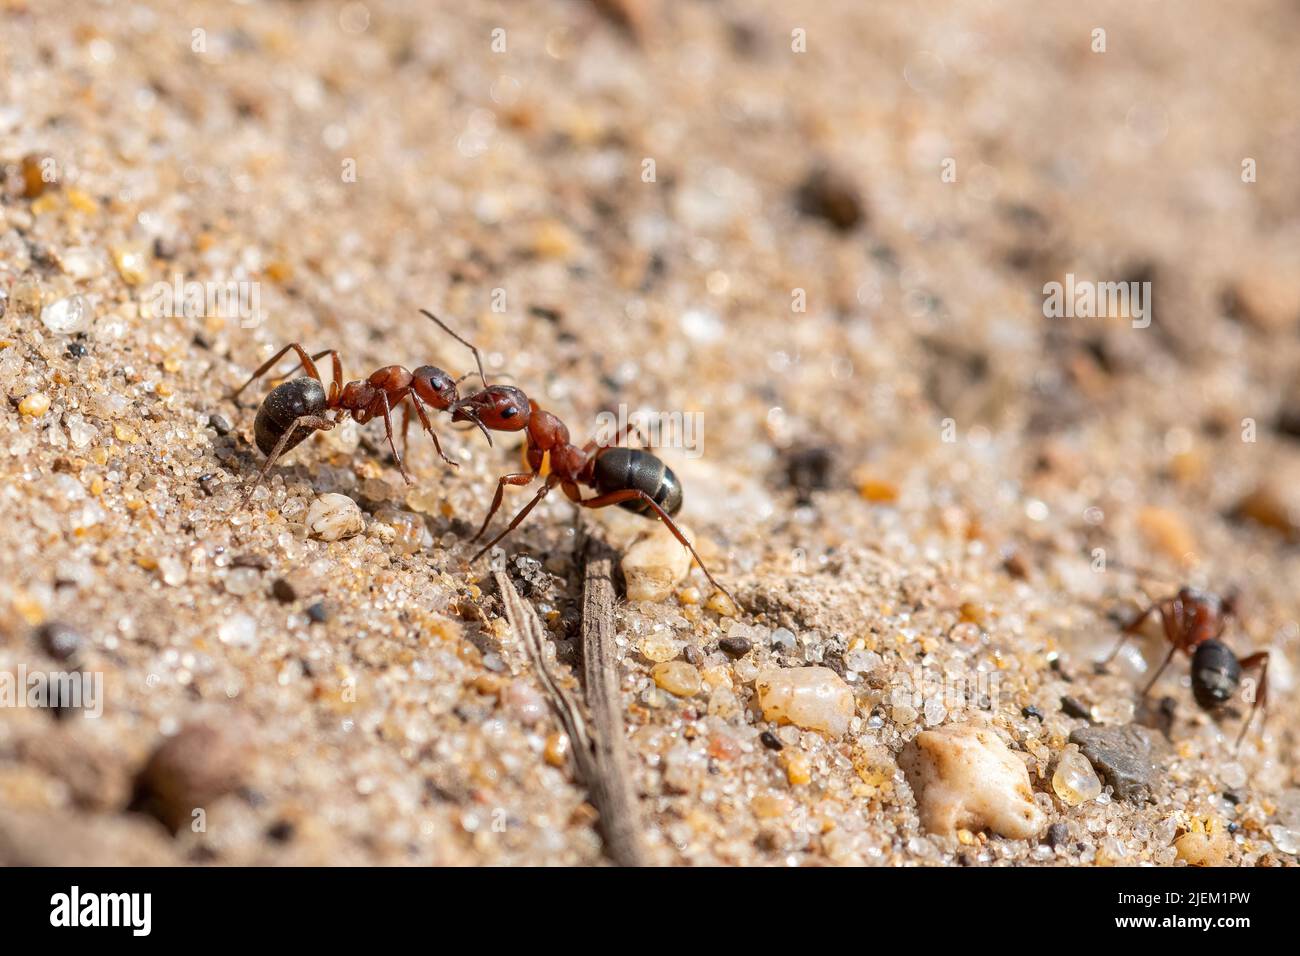 Two wood ants on sandy heath in Surrey, England, UK. Fighting, action, insect behaviour Stock Photo